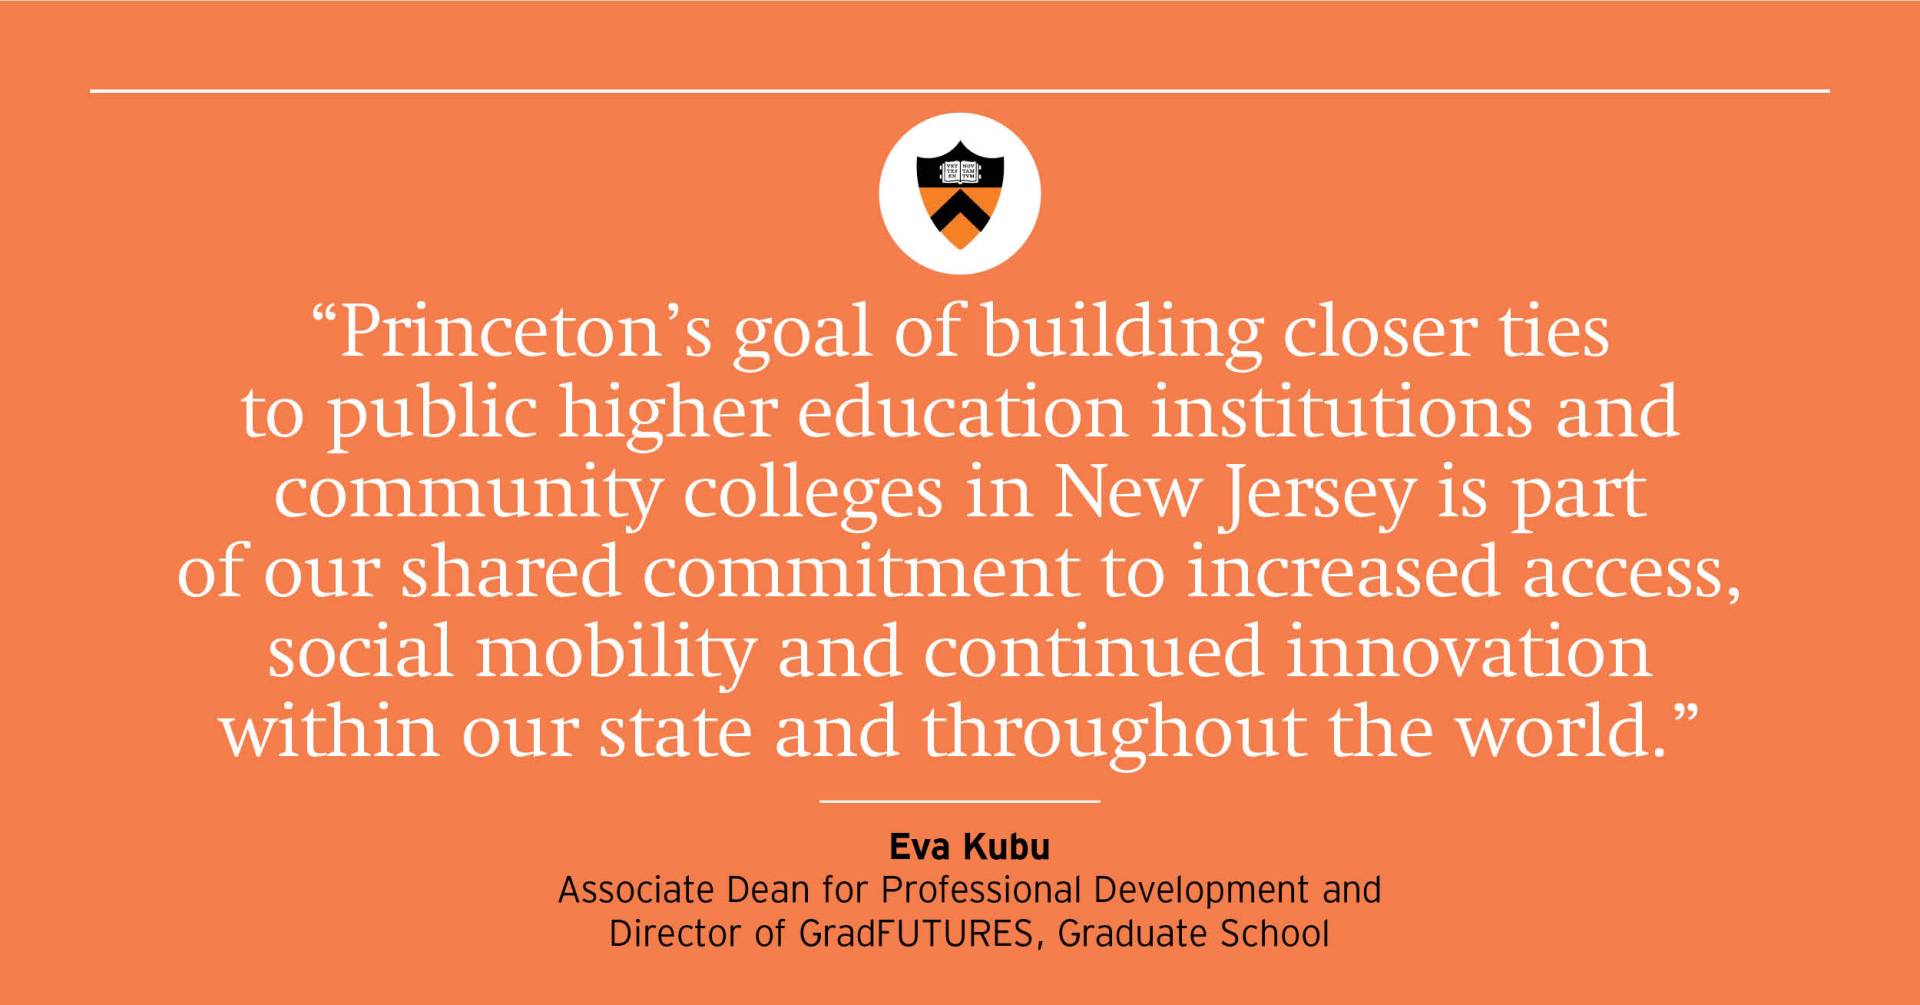 “Princeton’s goal of building closer ties to public higher education institutions and community colleges in New Jersey is part of our shared commitment to increased access, social mobility and continued innovation within our state and throughout the world.” — Eva Kubu, associate dean for professional development and director of GradFUTURES, Graduate School